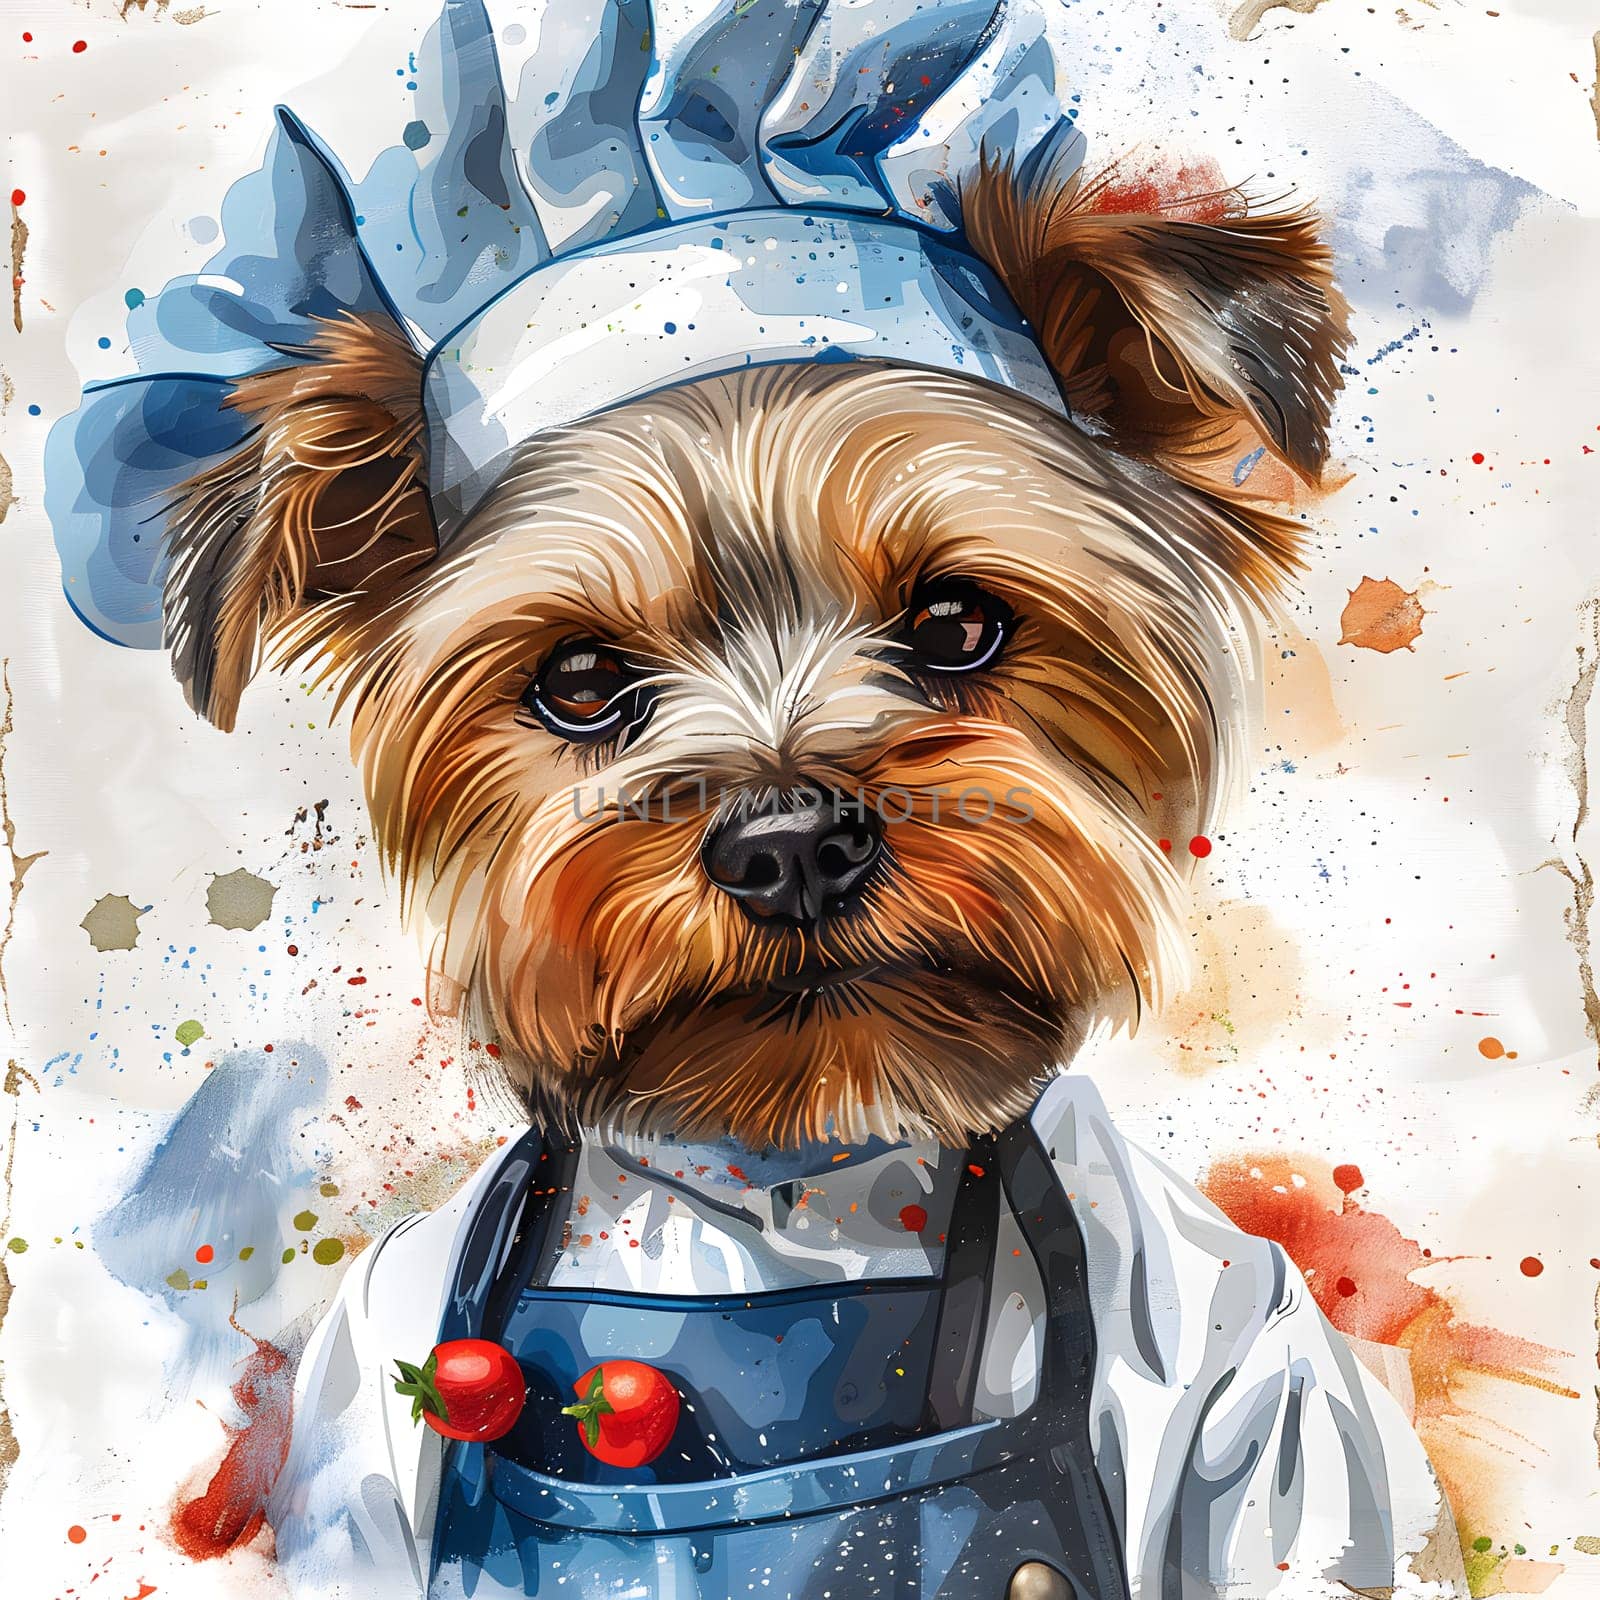 A Yorkshire Terrier, a small dog breed known for its livercolored coat, is dressed in a chefs hat and apron, showcasing its role as a companion dog with a working animal spirit